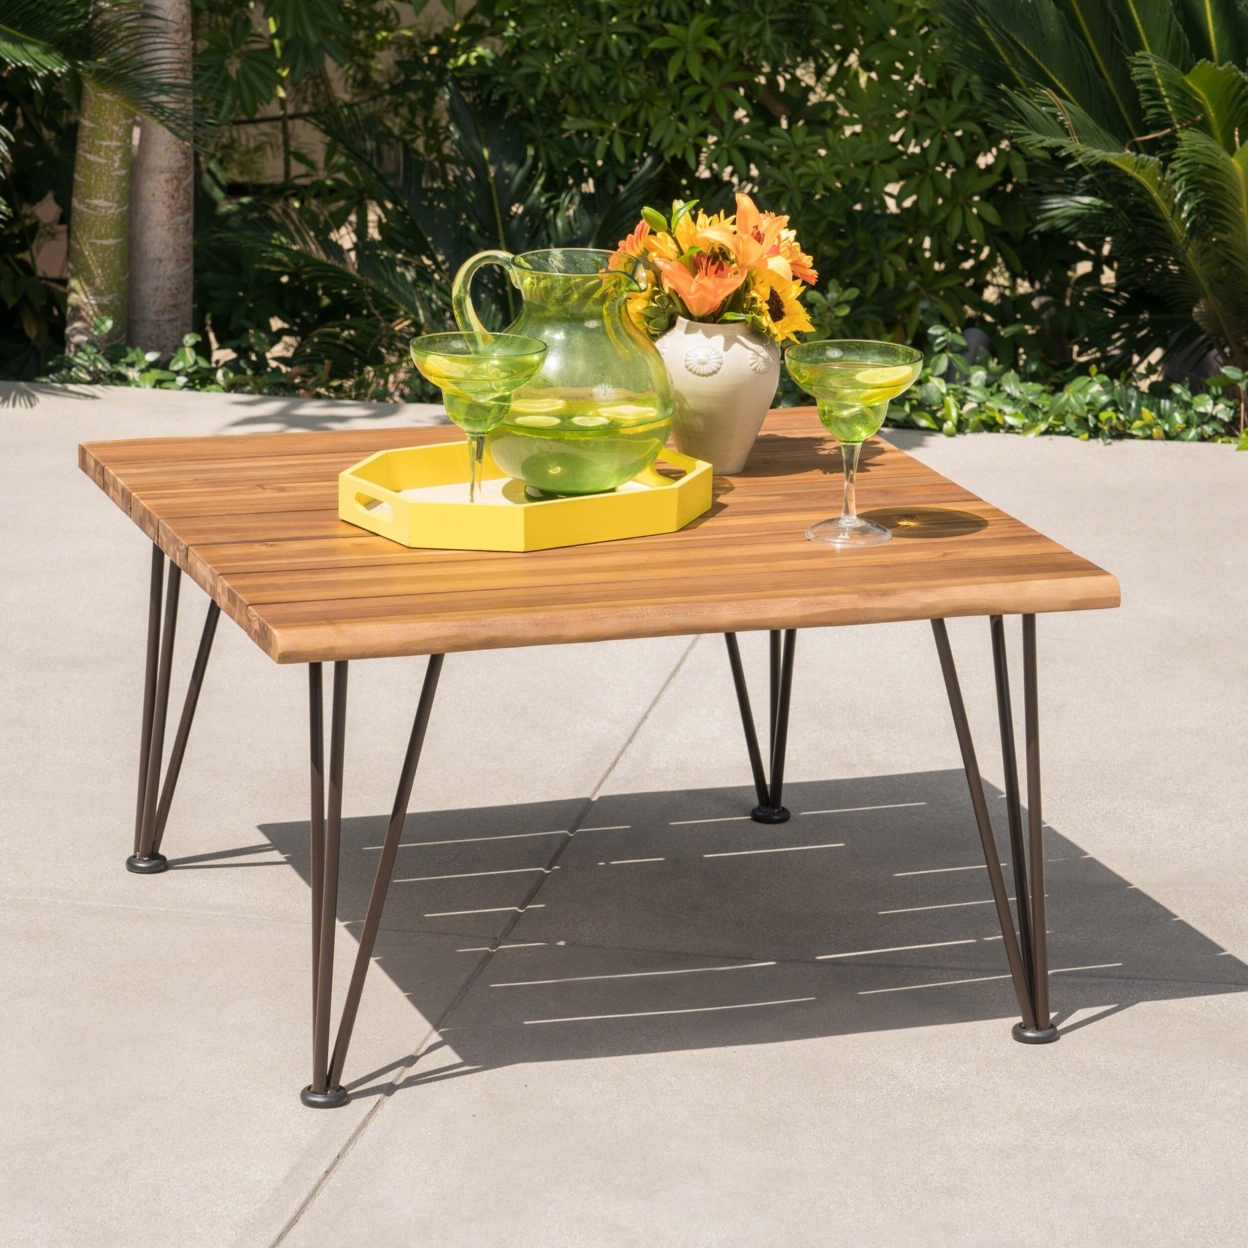 Keira Outdoor Rustic Industrial Acacia Wood Coffee Table With Metal Hairpin Legs